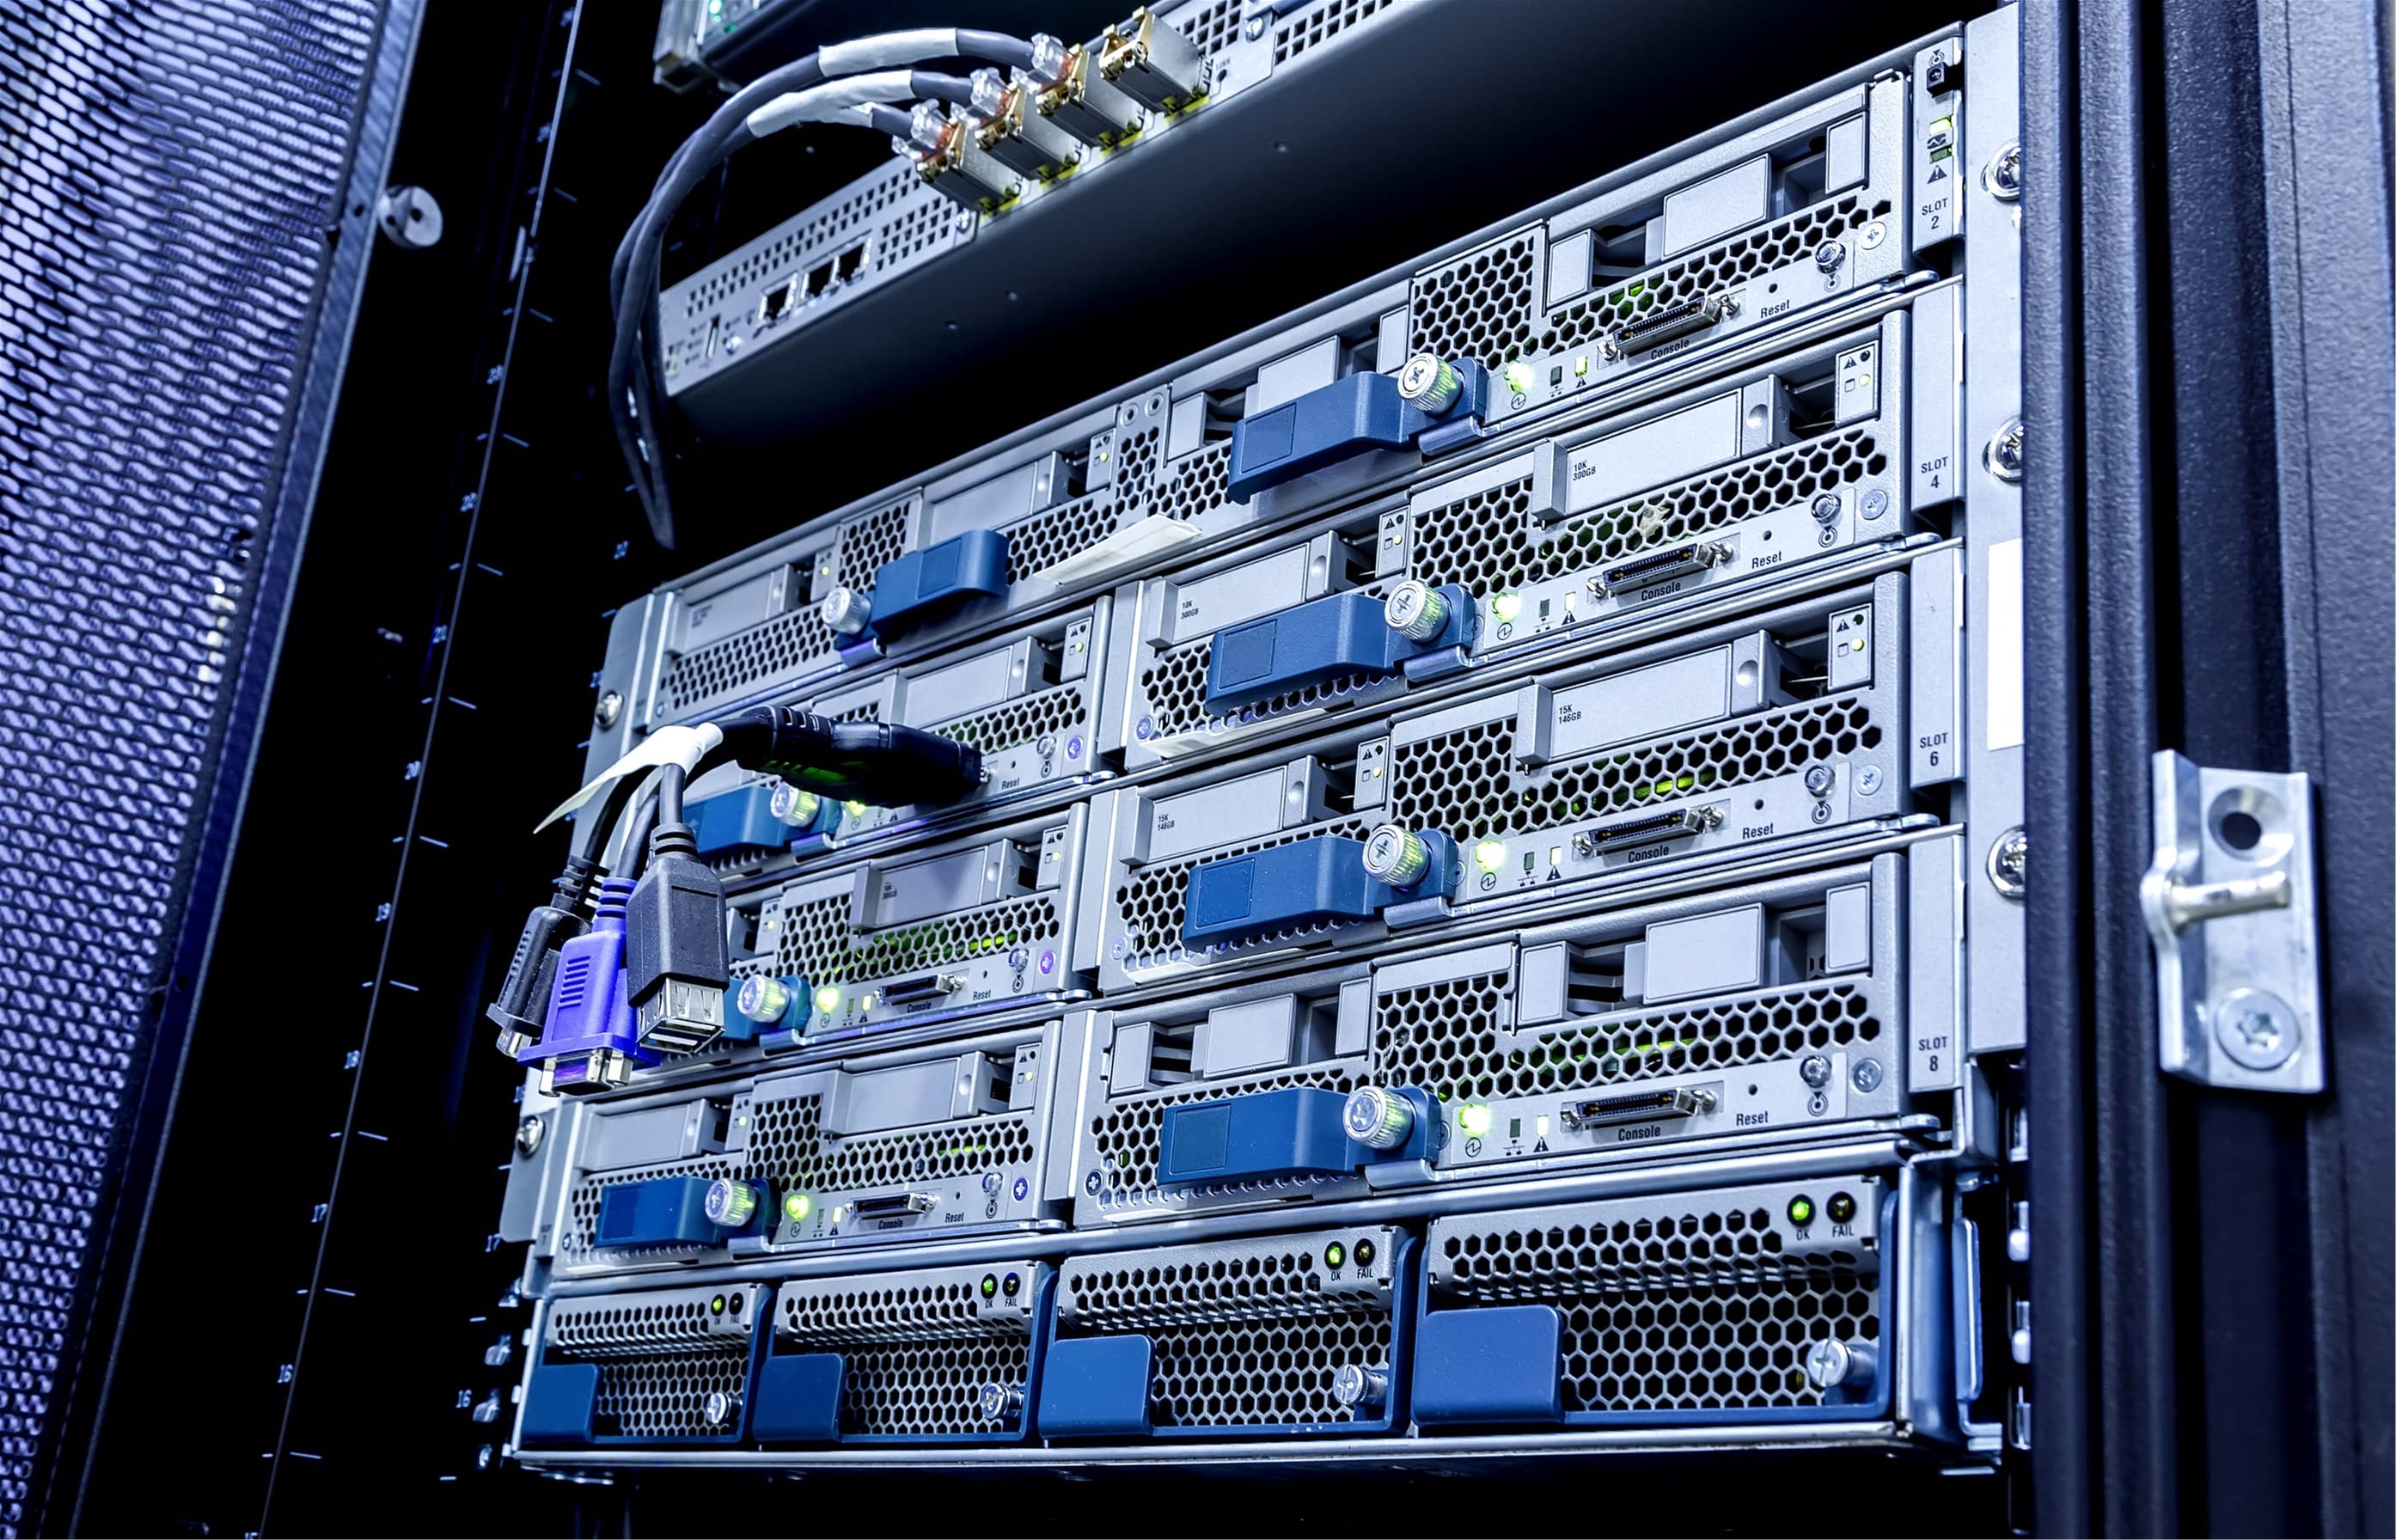 10 Crucial Roles Fiber and Ethernet/Copper Play in Modern Data Centers